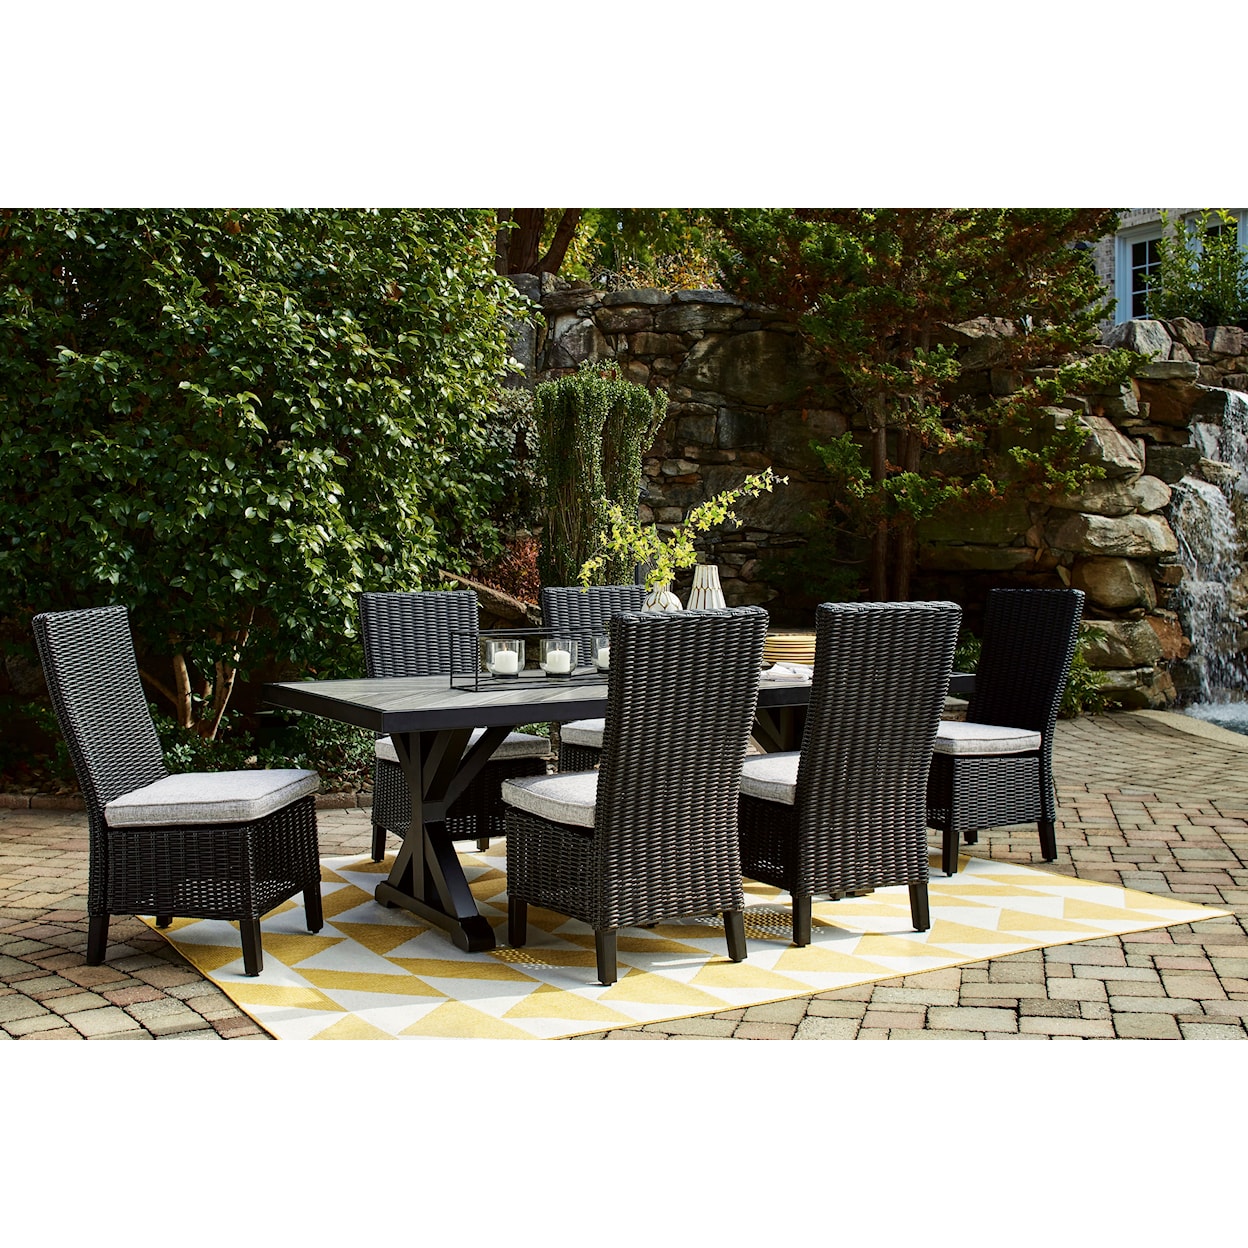 Ashley Signature Design Beachcroft Outdoor Dining Table with 6 Chairs